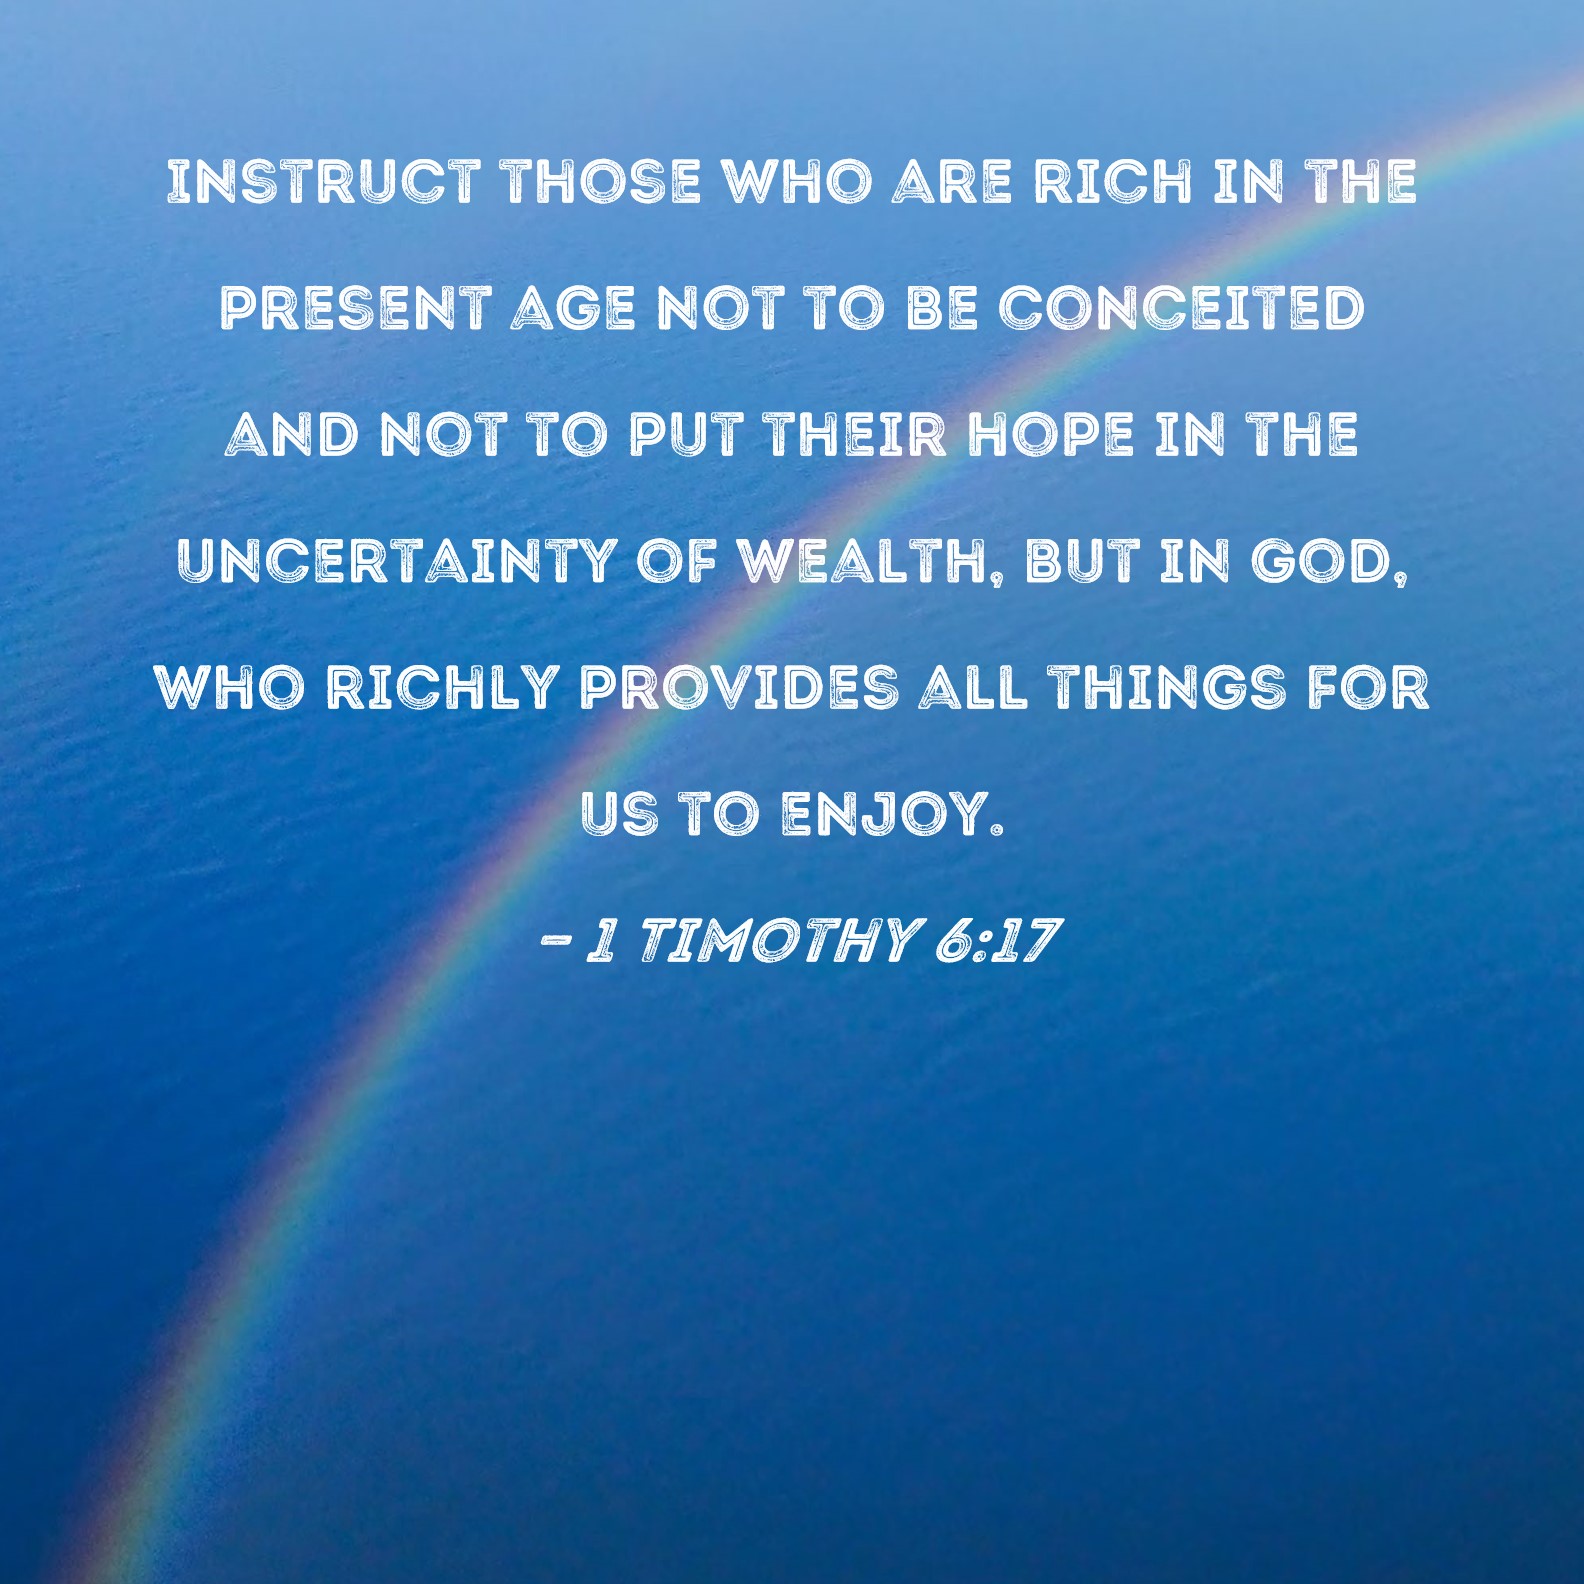 1-timothy-6-17-instruct-those-who-are-rich-in-the-present-age-not-to-be-conceited-and-not-to-put